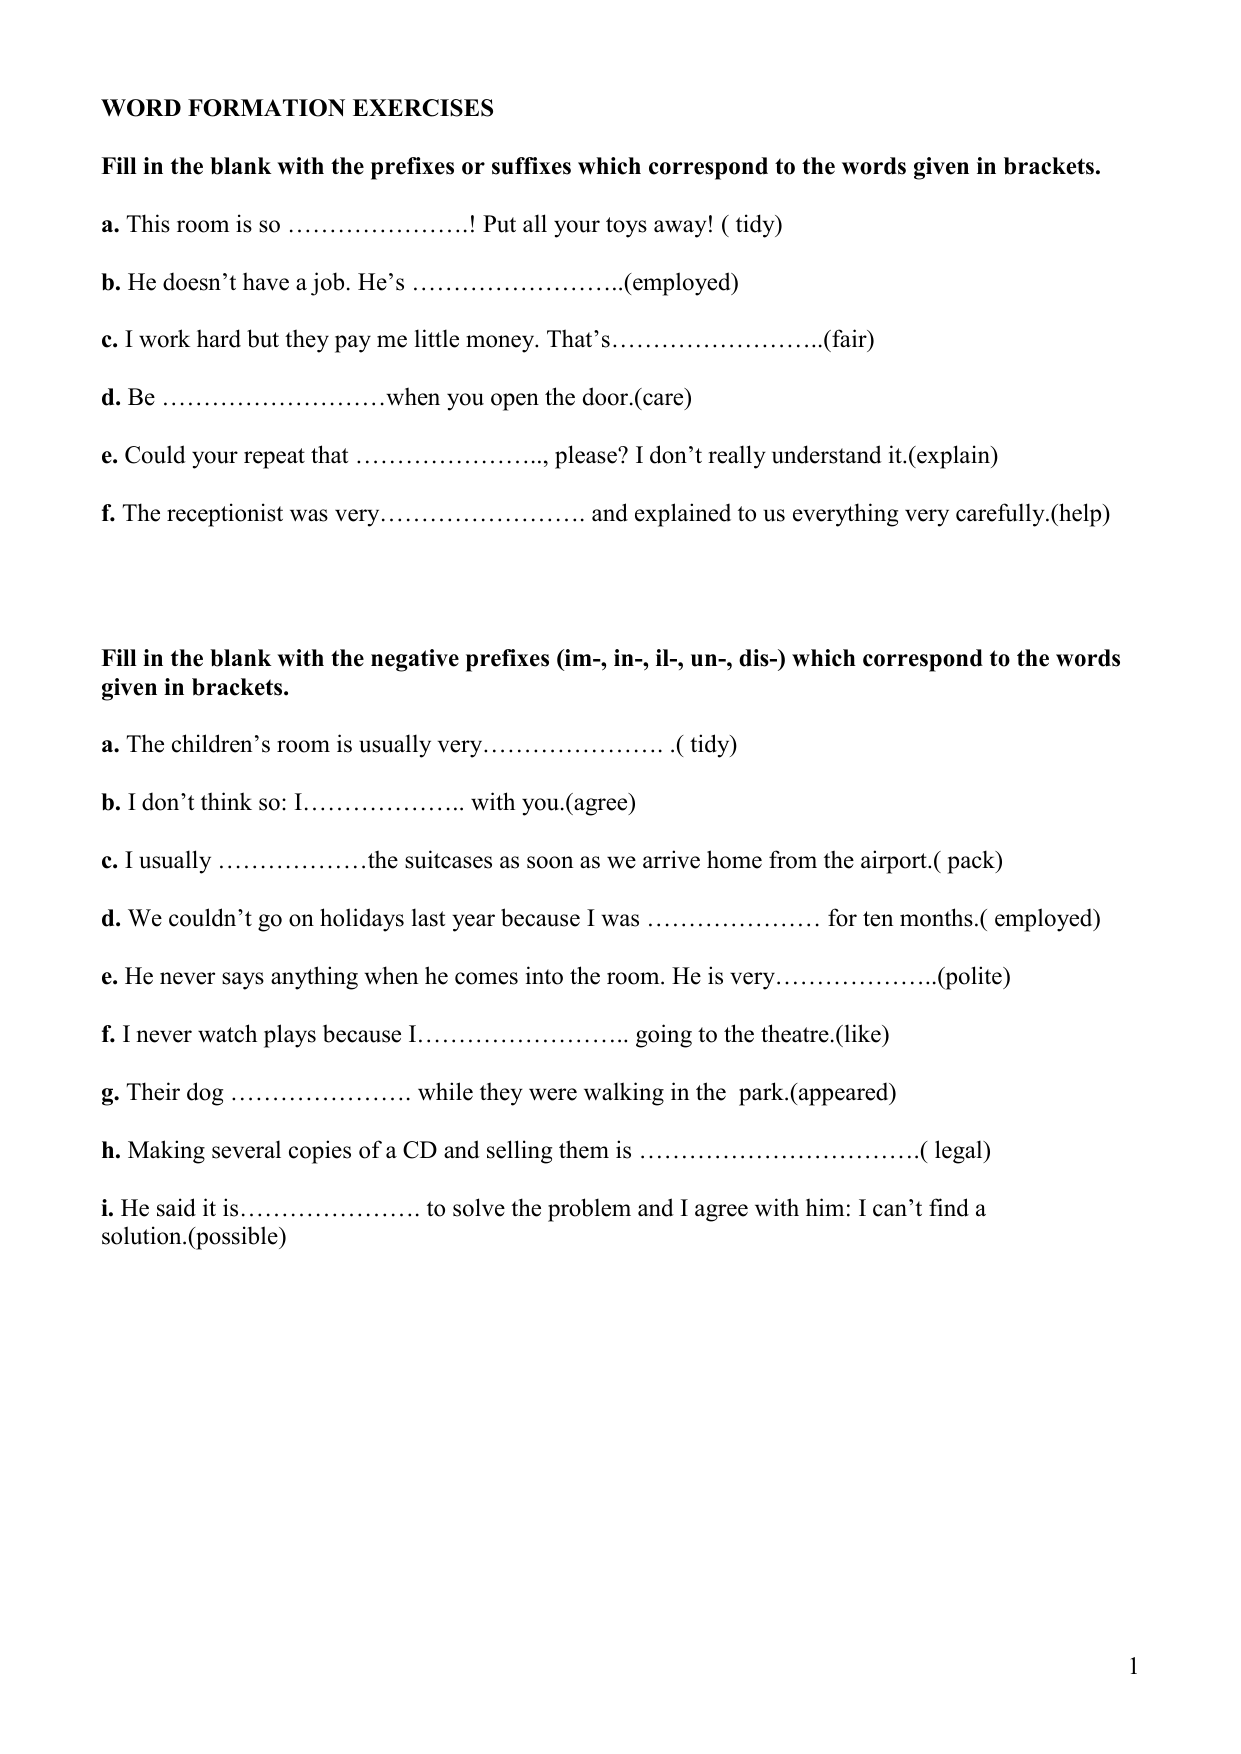 Word formation prefixes. Word formation negative prefixes exercises. Word formation prefixes exercises. Word formation exercises. Word formation Worksheets.